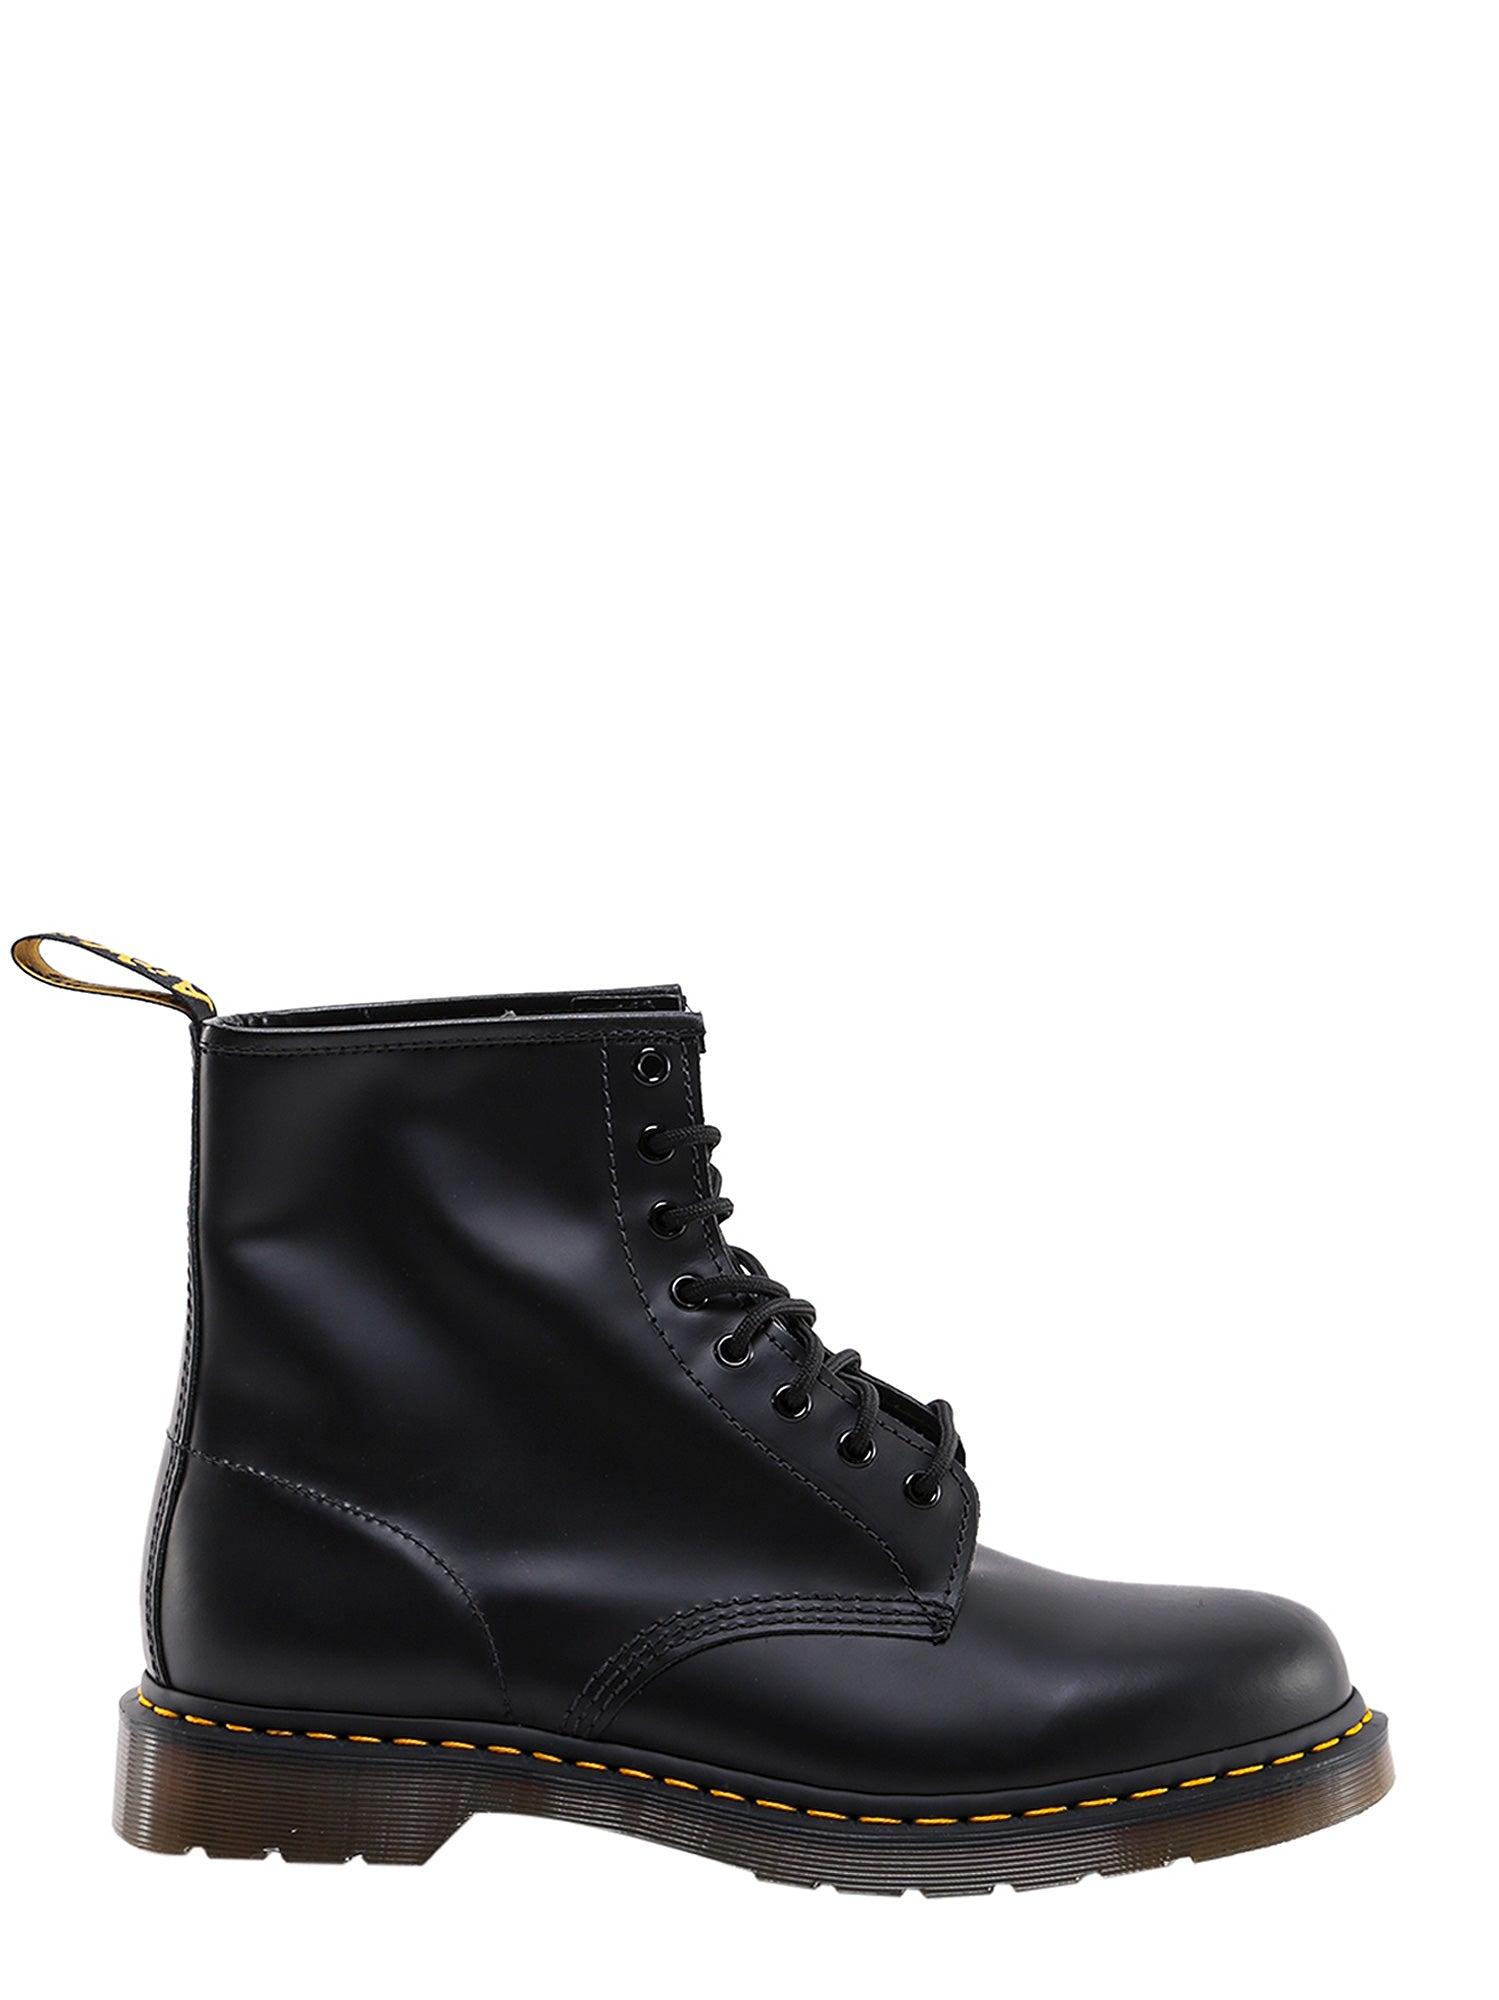 Dr. Martens Leather Lace-up Boots in Black | Lyst